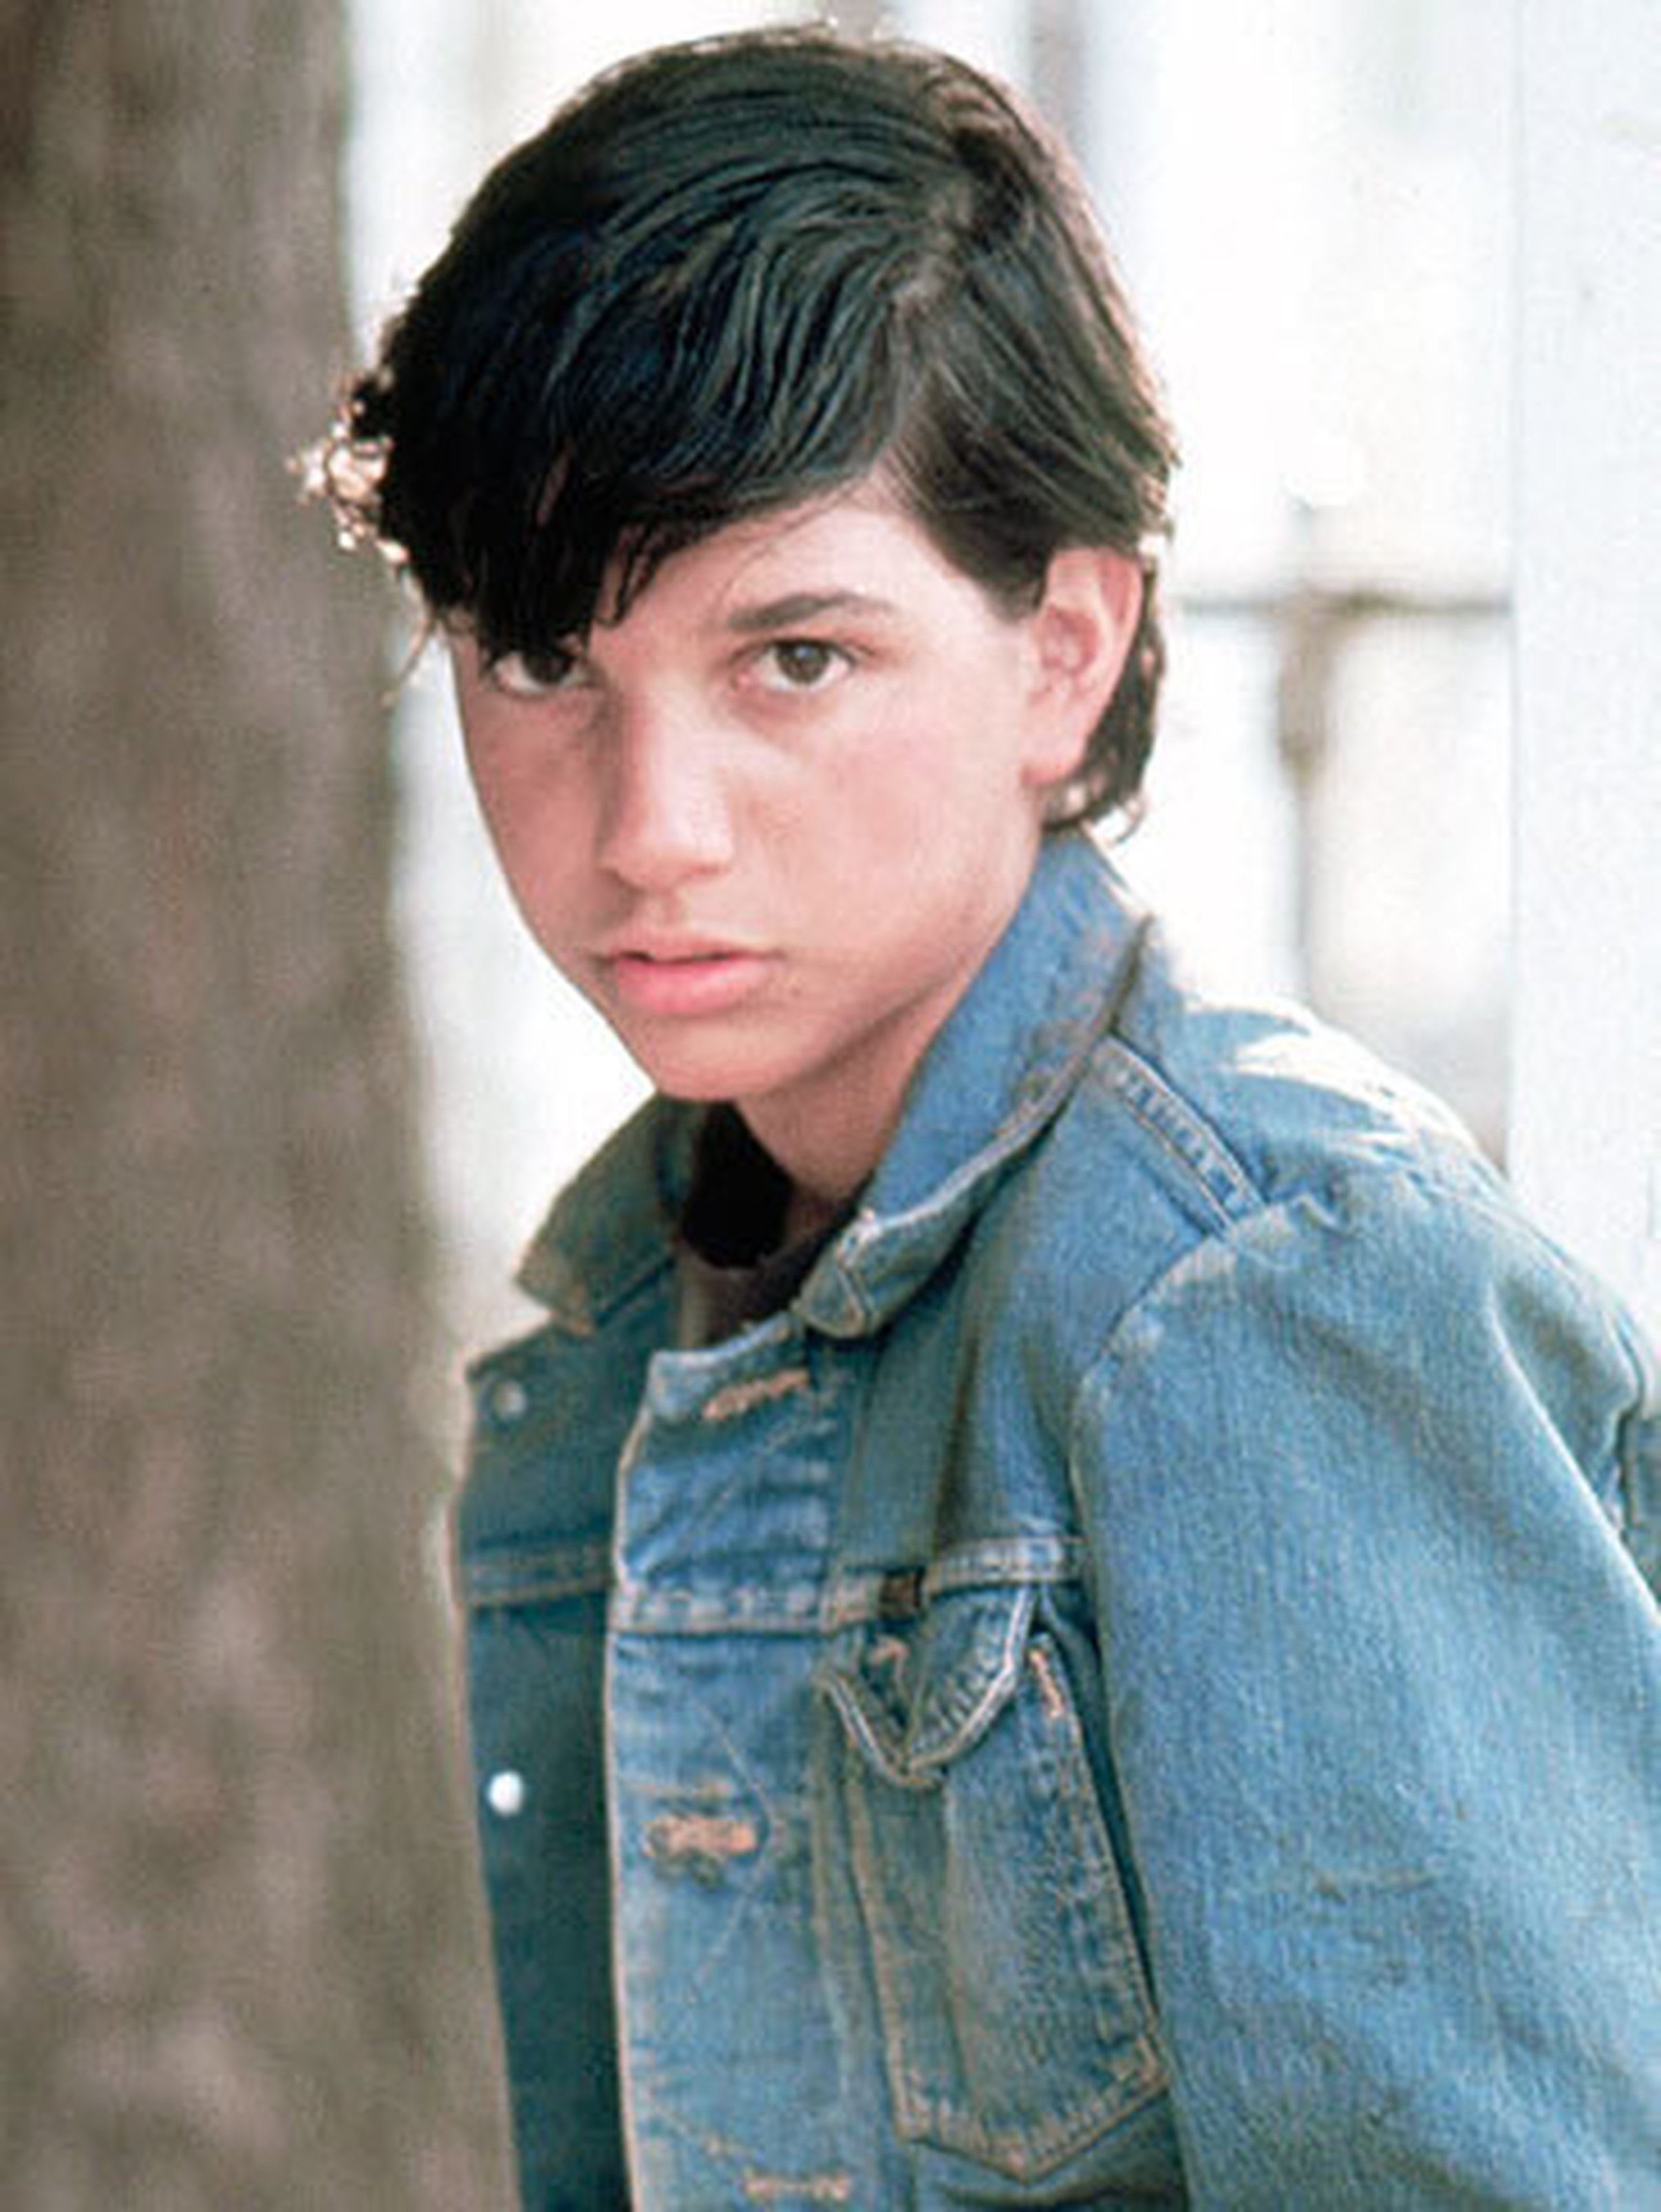 Why can't Dally accept Johnny's death in The Outsiders?